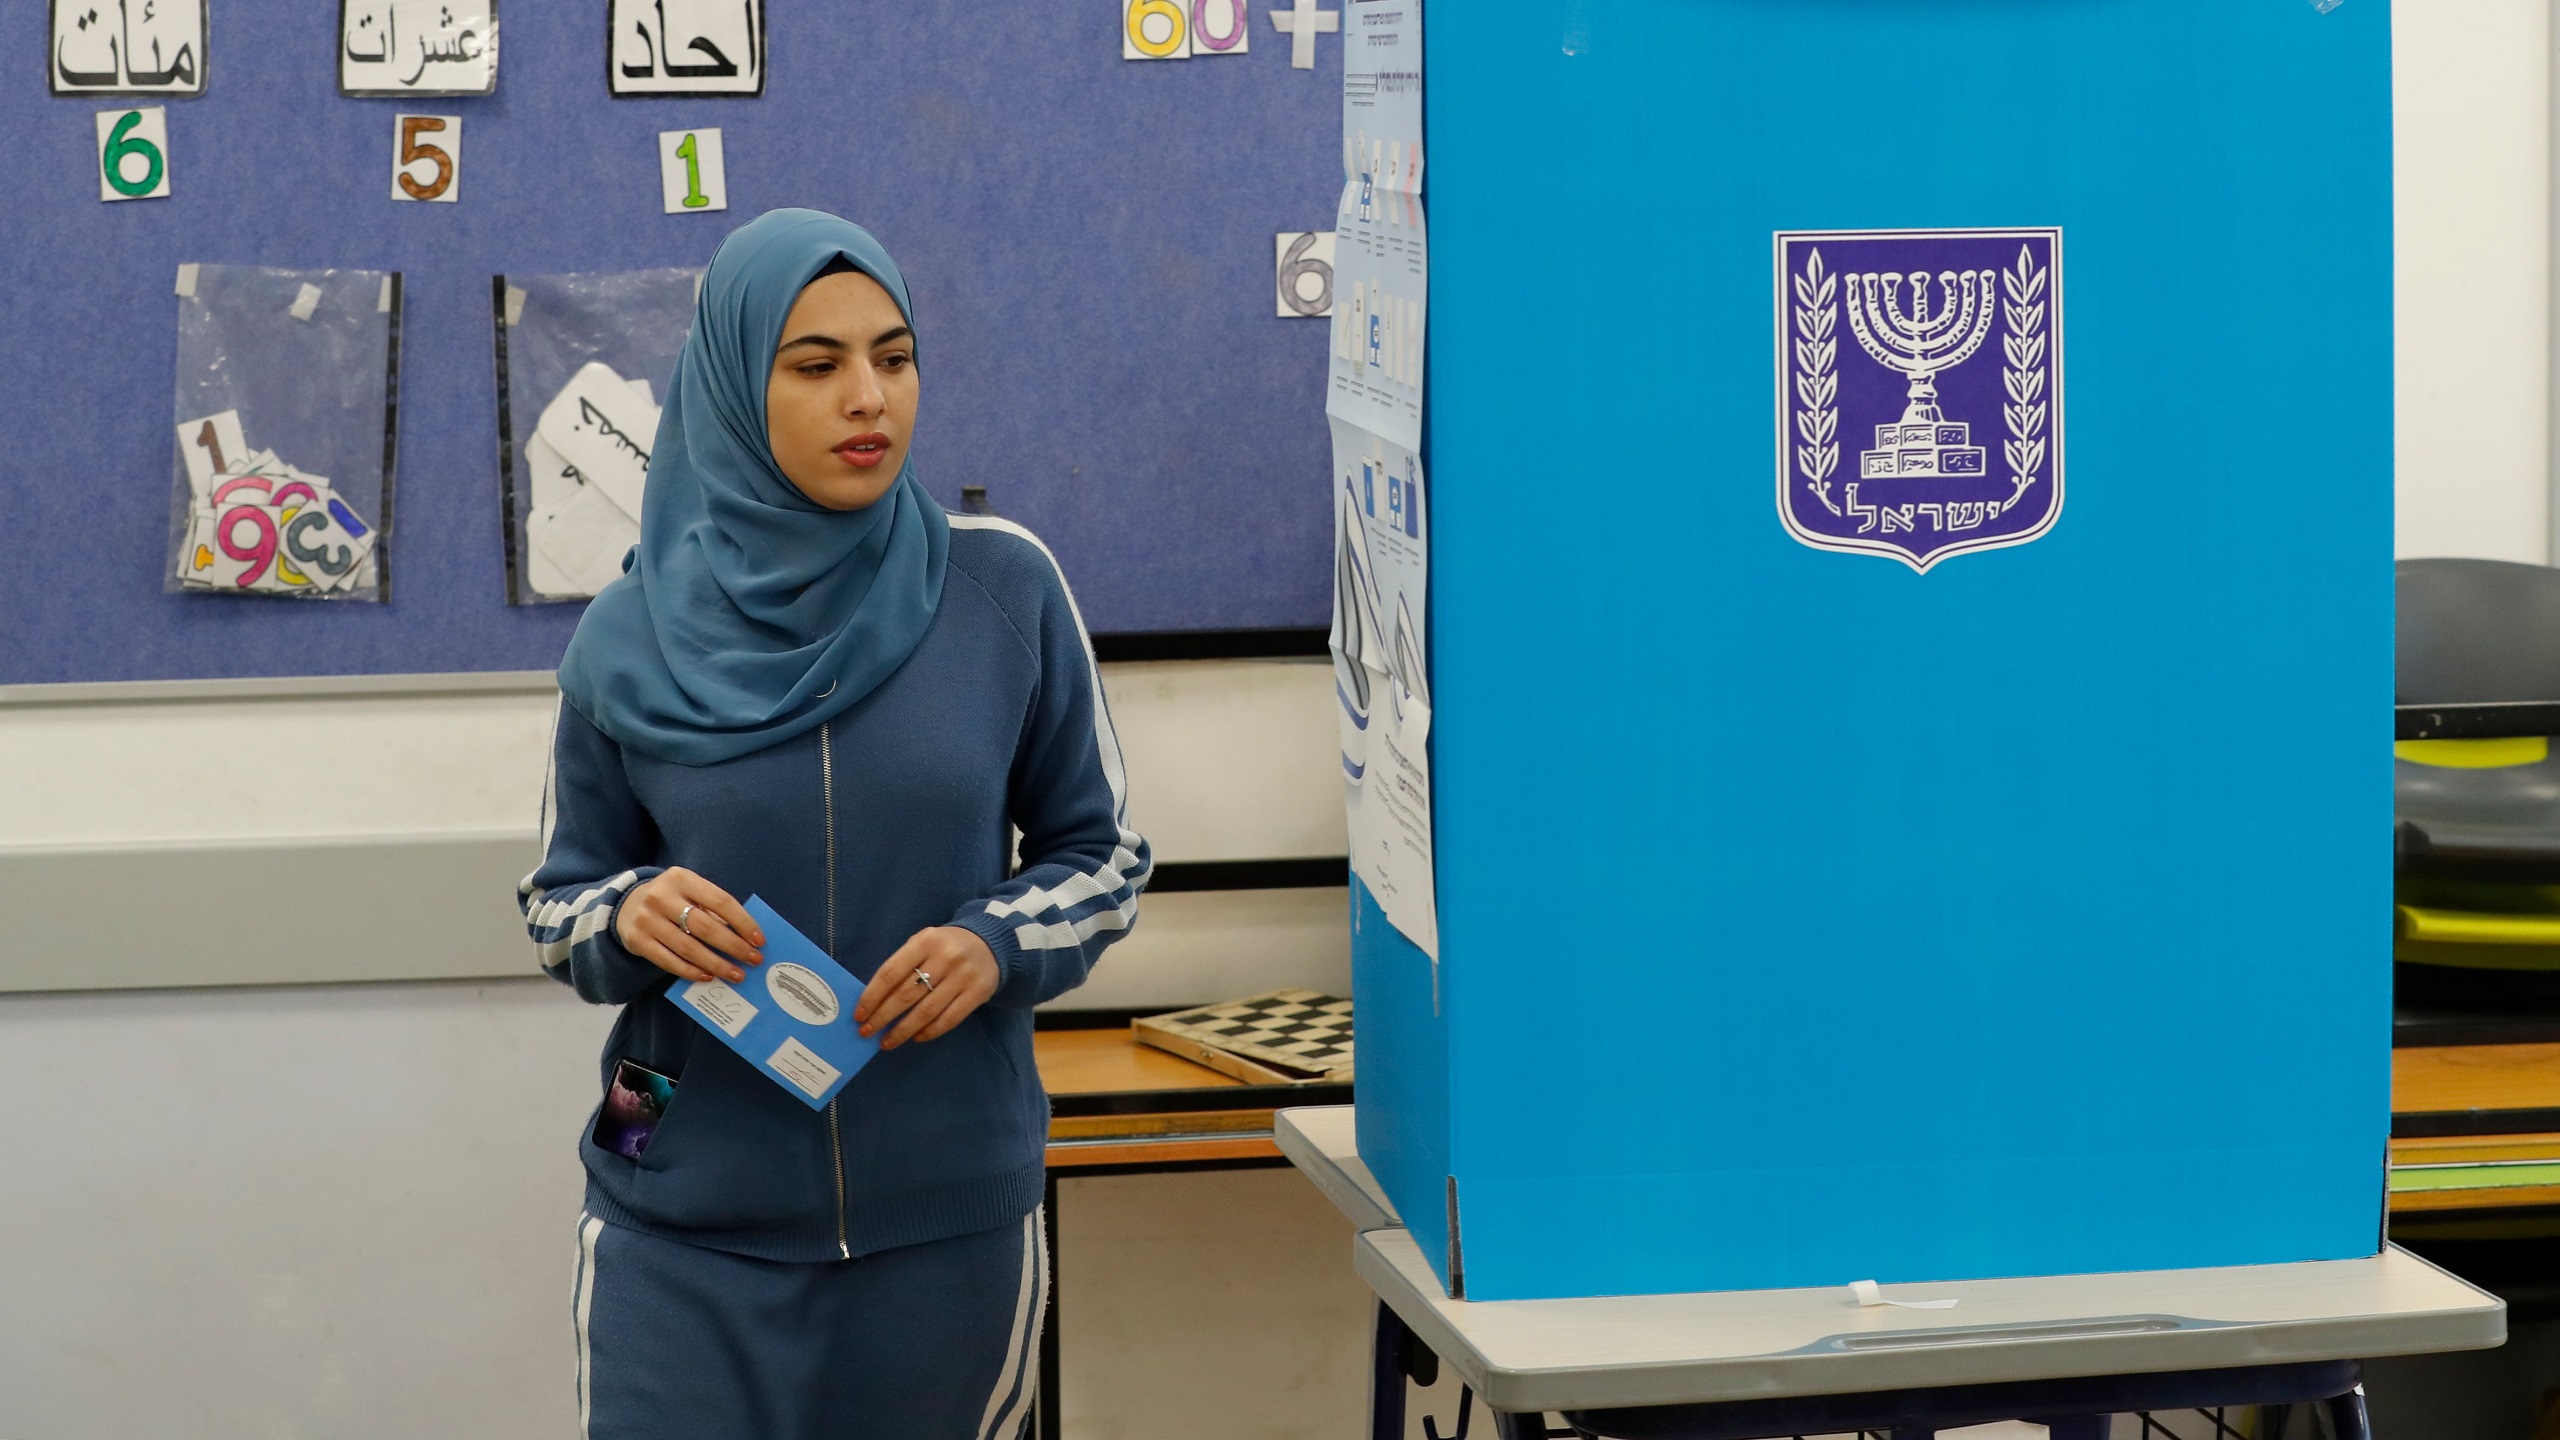 Disenchanted Arab Voters May Play Major Role in Shaping Israeli Election